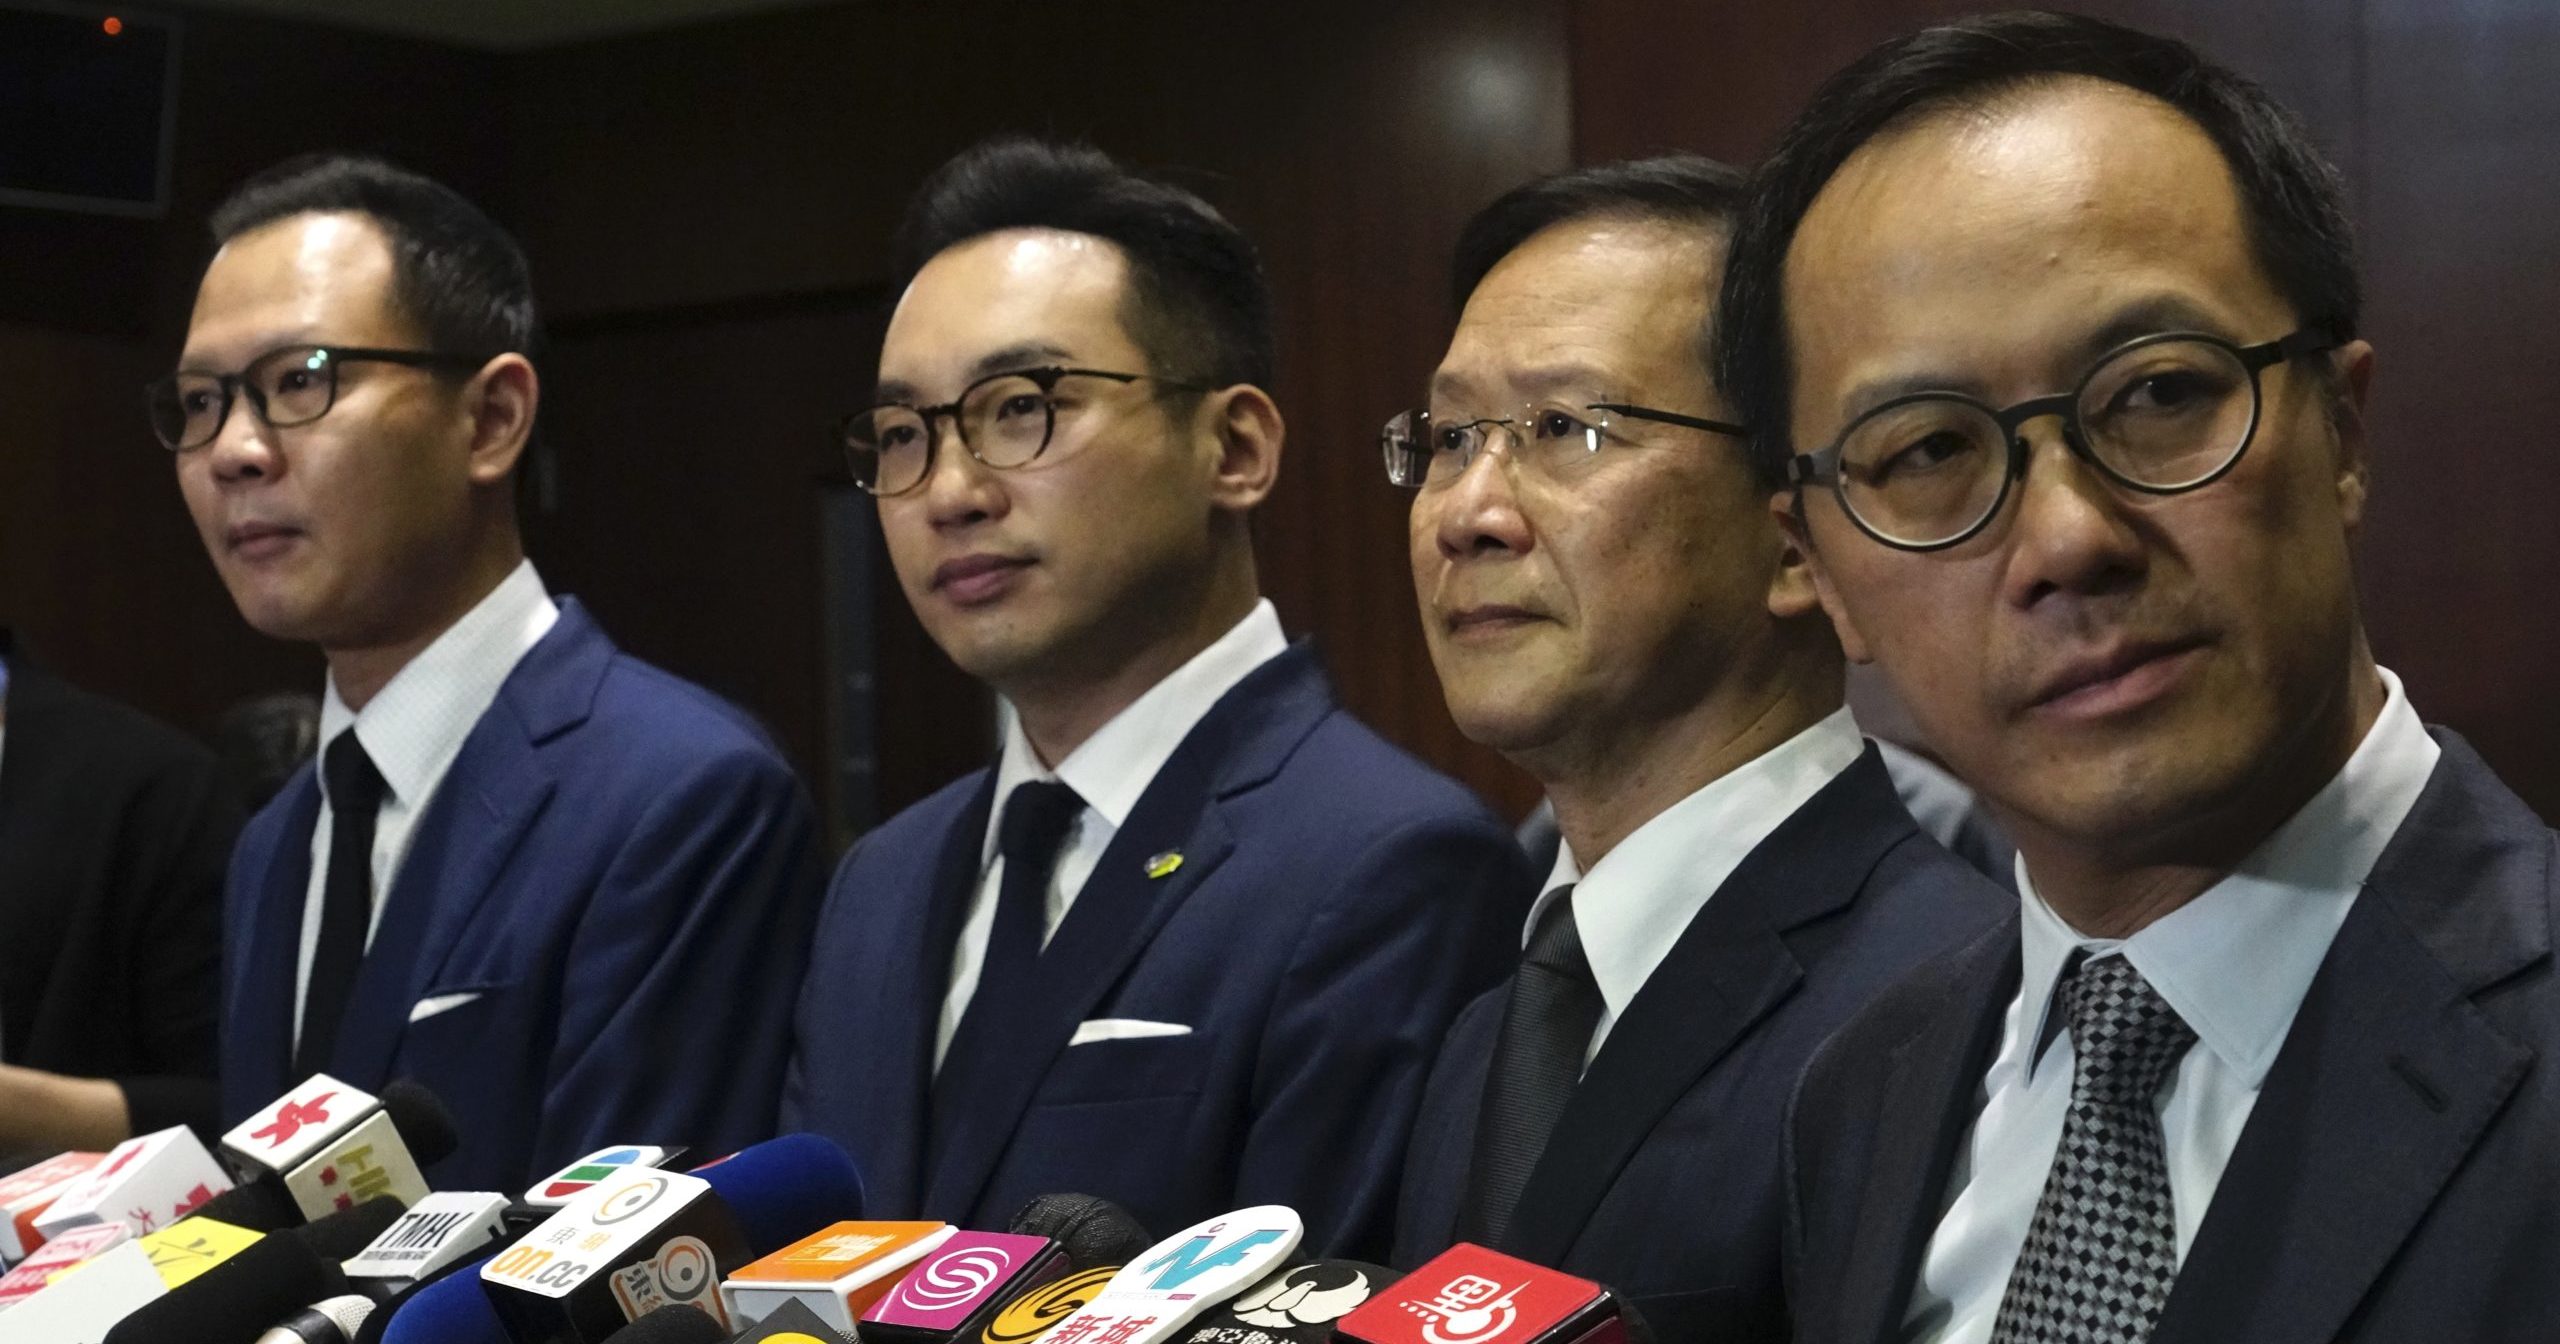 Four pro-democracy lawmakers listen to reporters' questions during a news conference in Hong Kong on Nov. 11, 2020.